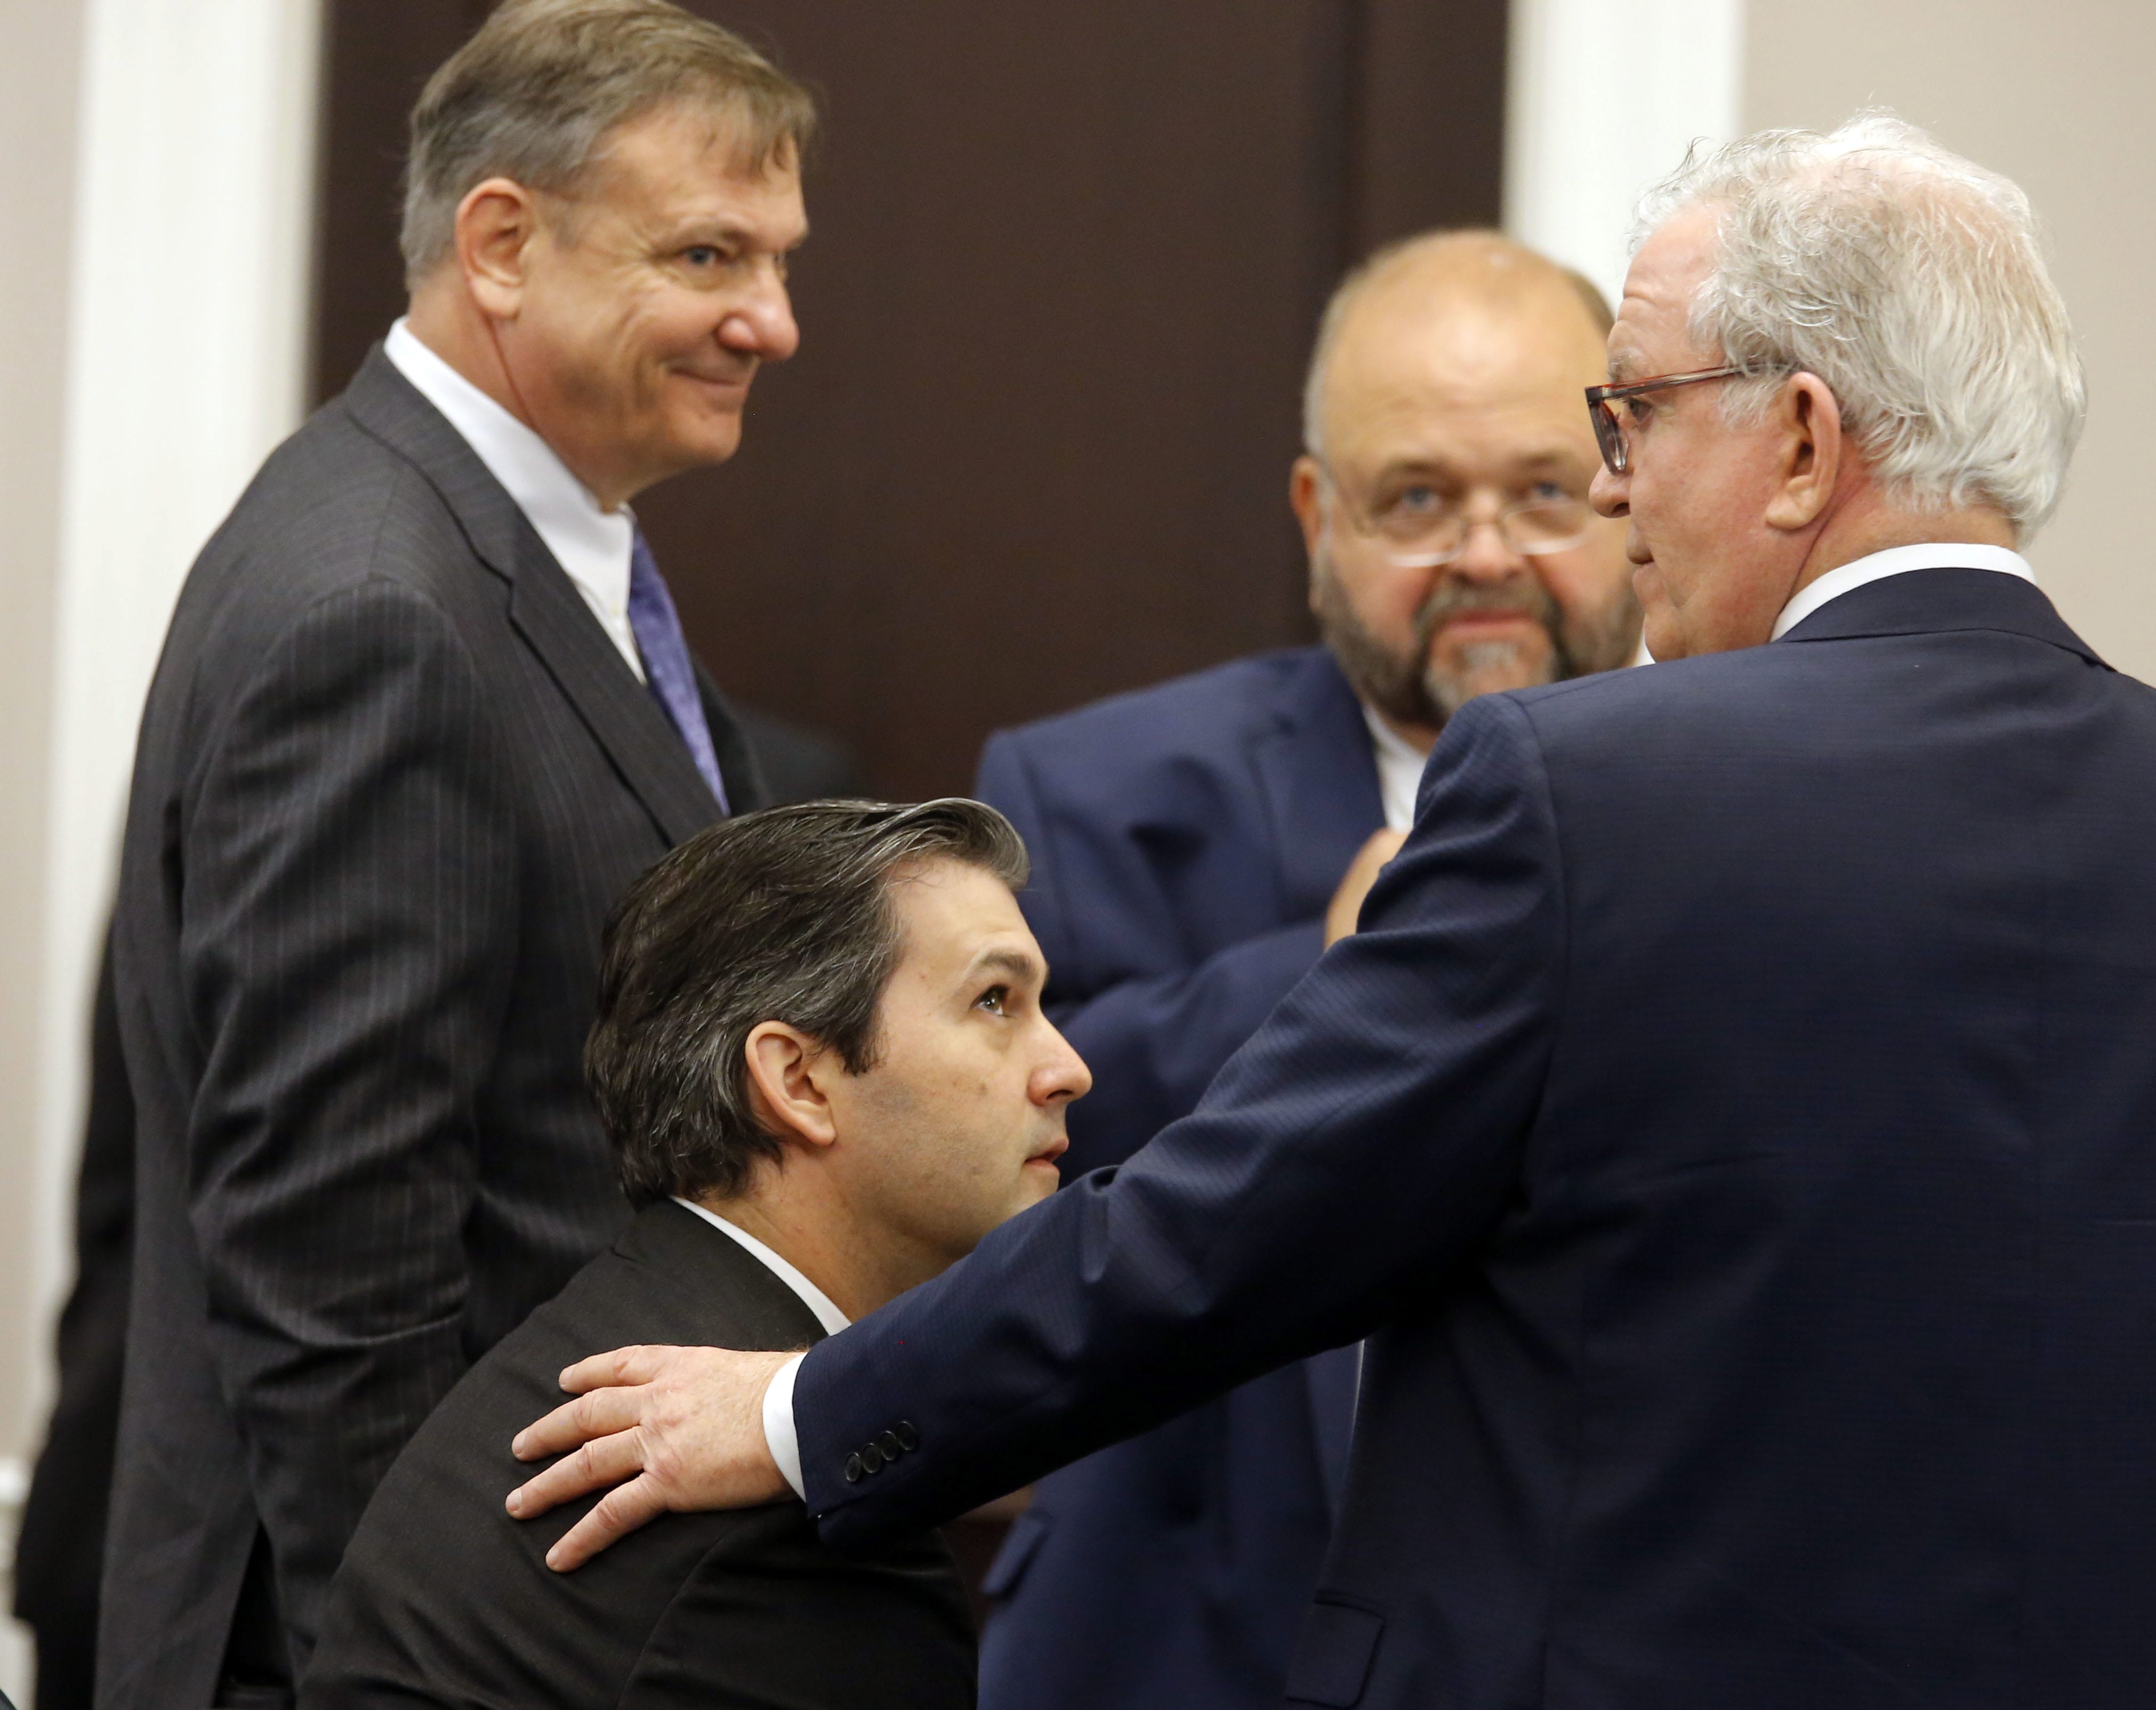 Defense attorneys Don McCune, left, Andy Savage and Miller Shealy surround former North Charleston police officer Michael Slager after a note was sent by the jury as they continue to deliberate at the Charleston County court in Charleston, S.C., Monday, Dec. 5, 2016. The jury remained undecided, but not deadlocked, on Monday in the murder trial of Slager who is charged with shooting a black motorist in South Carolina last year.